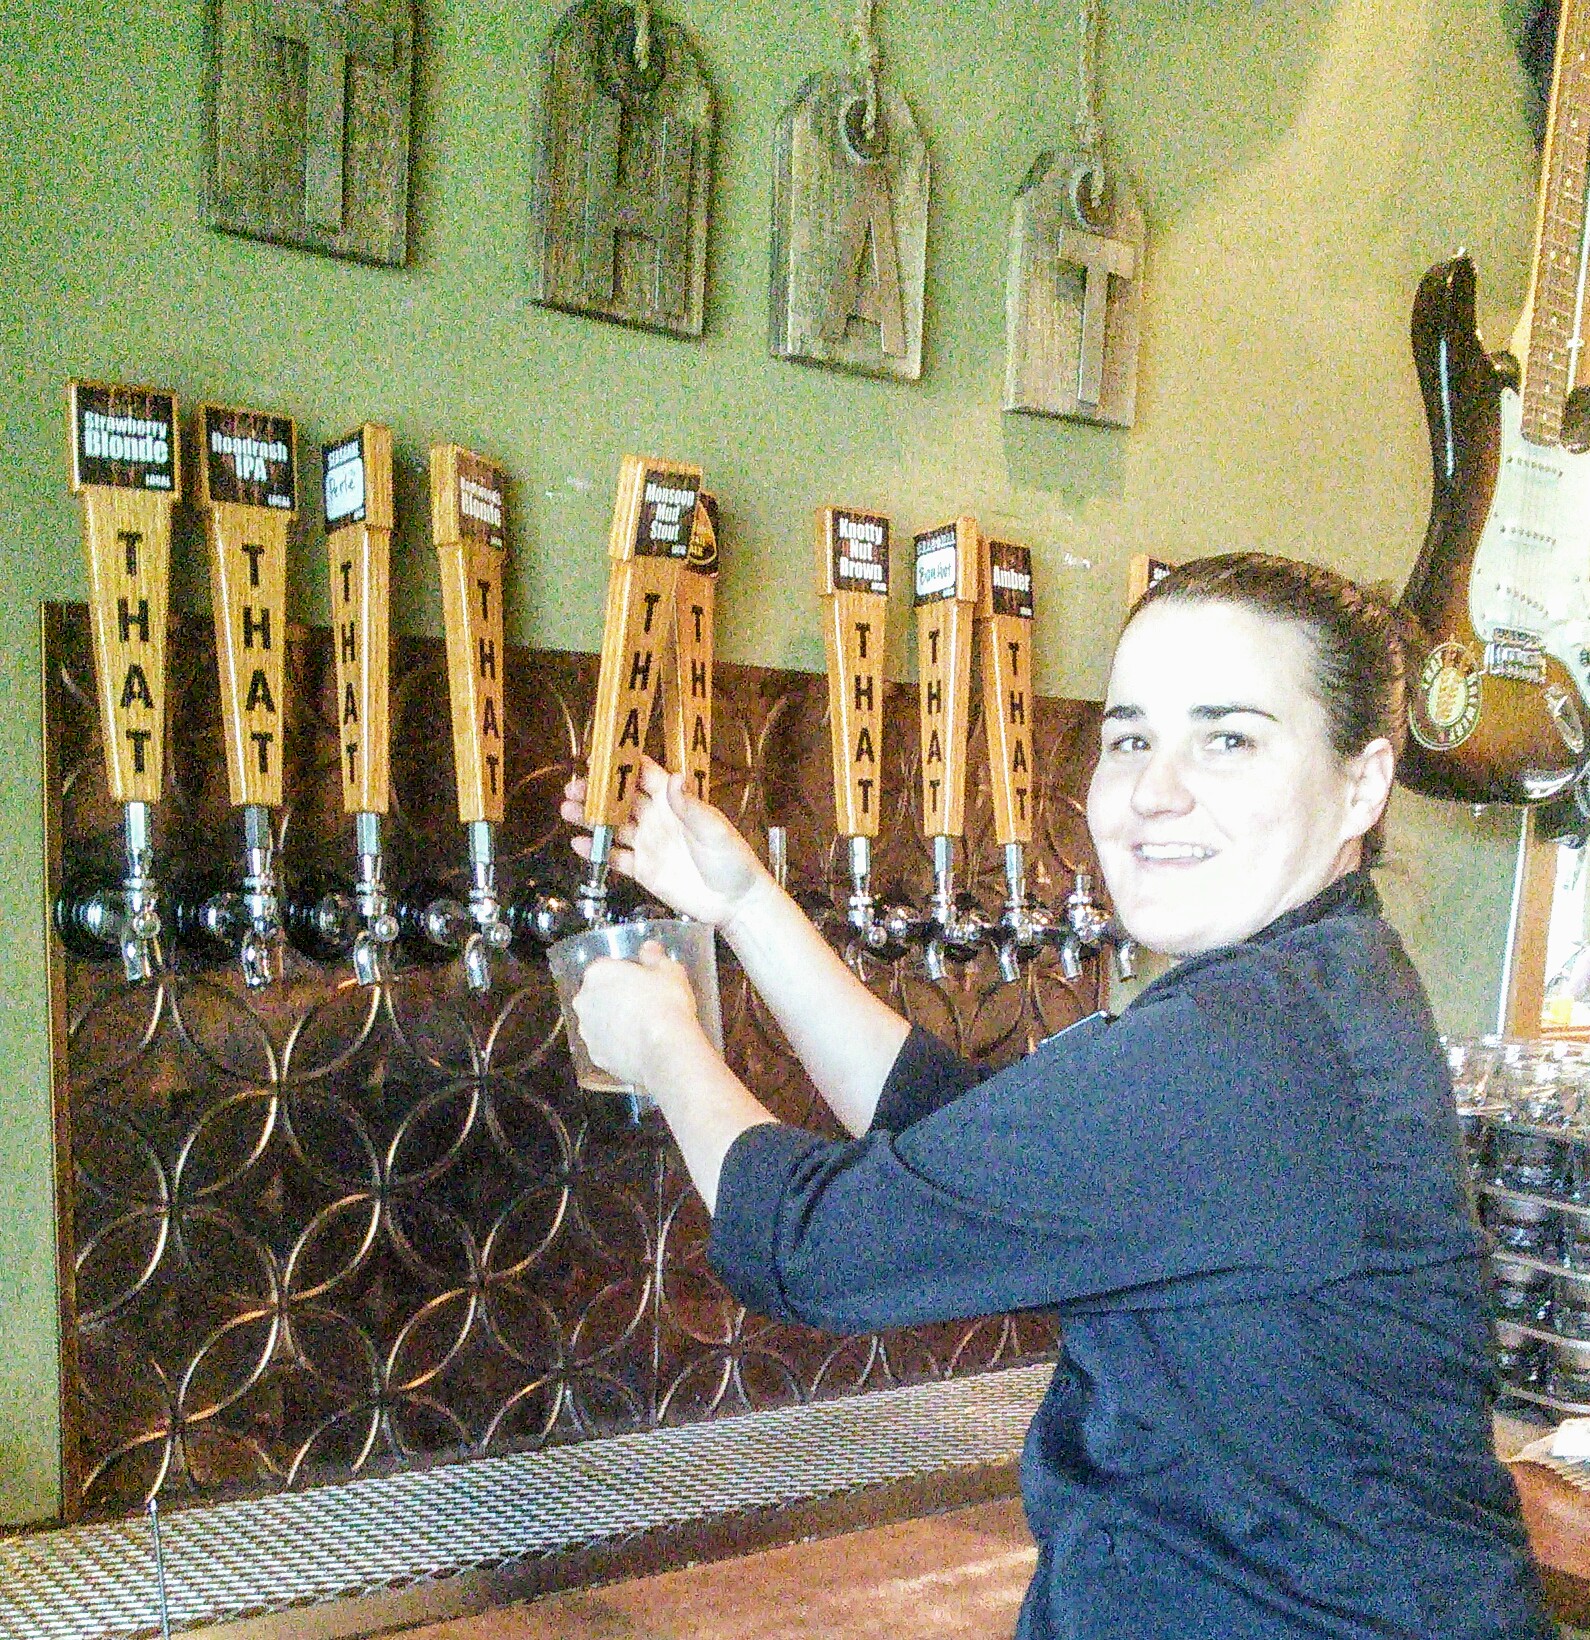 Meet Chef Val At THAT Brewery & Pub In Pine!